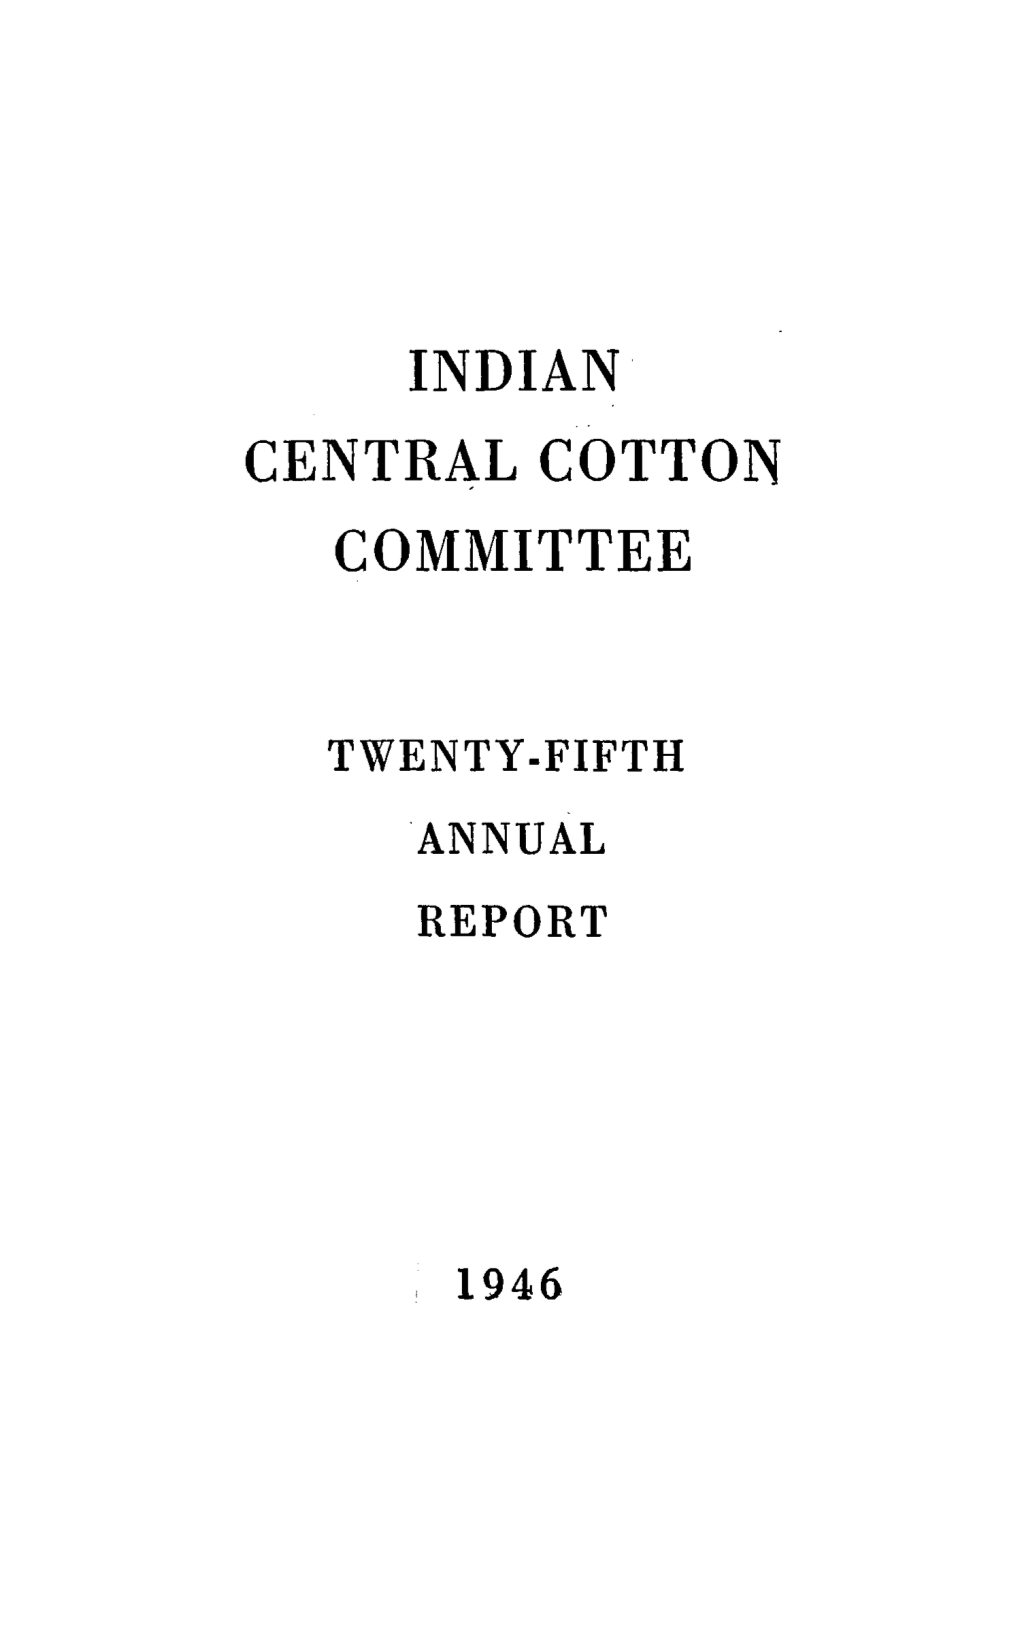 Indian Central Cotton Committee